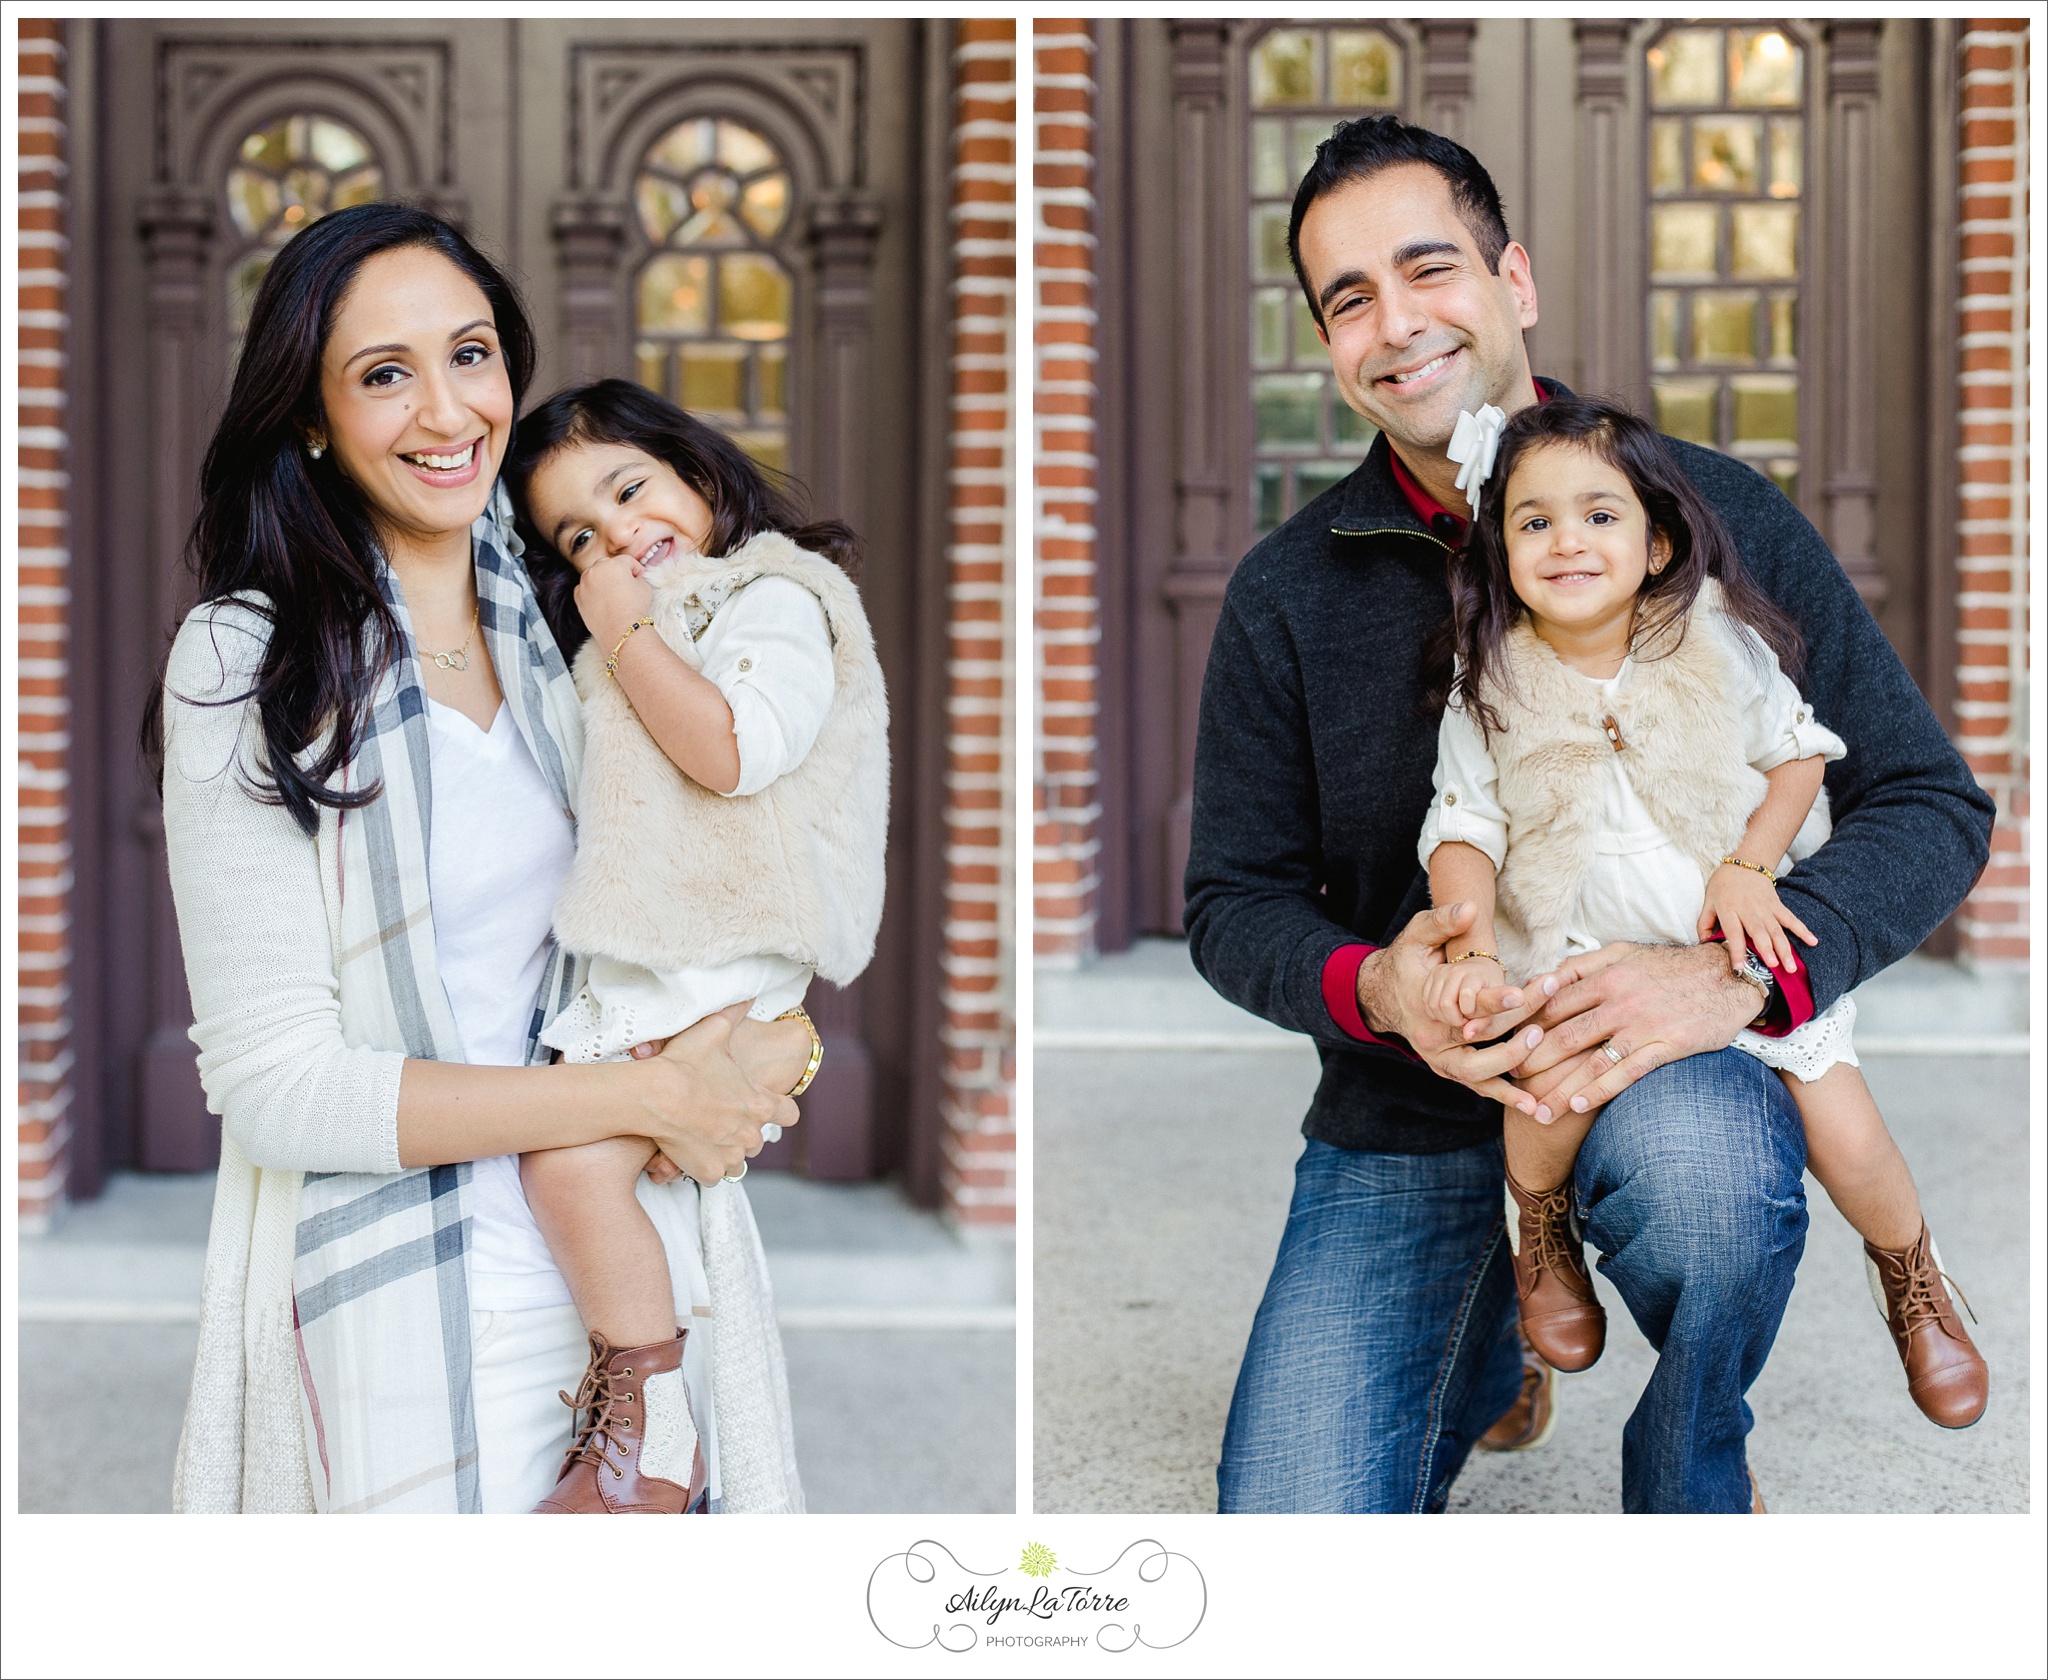 South Tampa Photographer | © Ailyn La Torre 2014